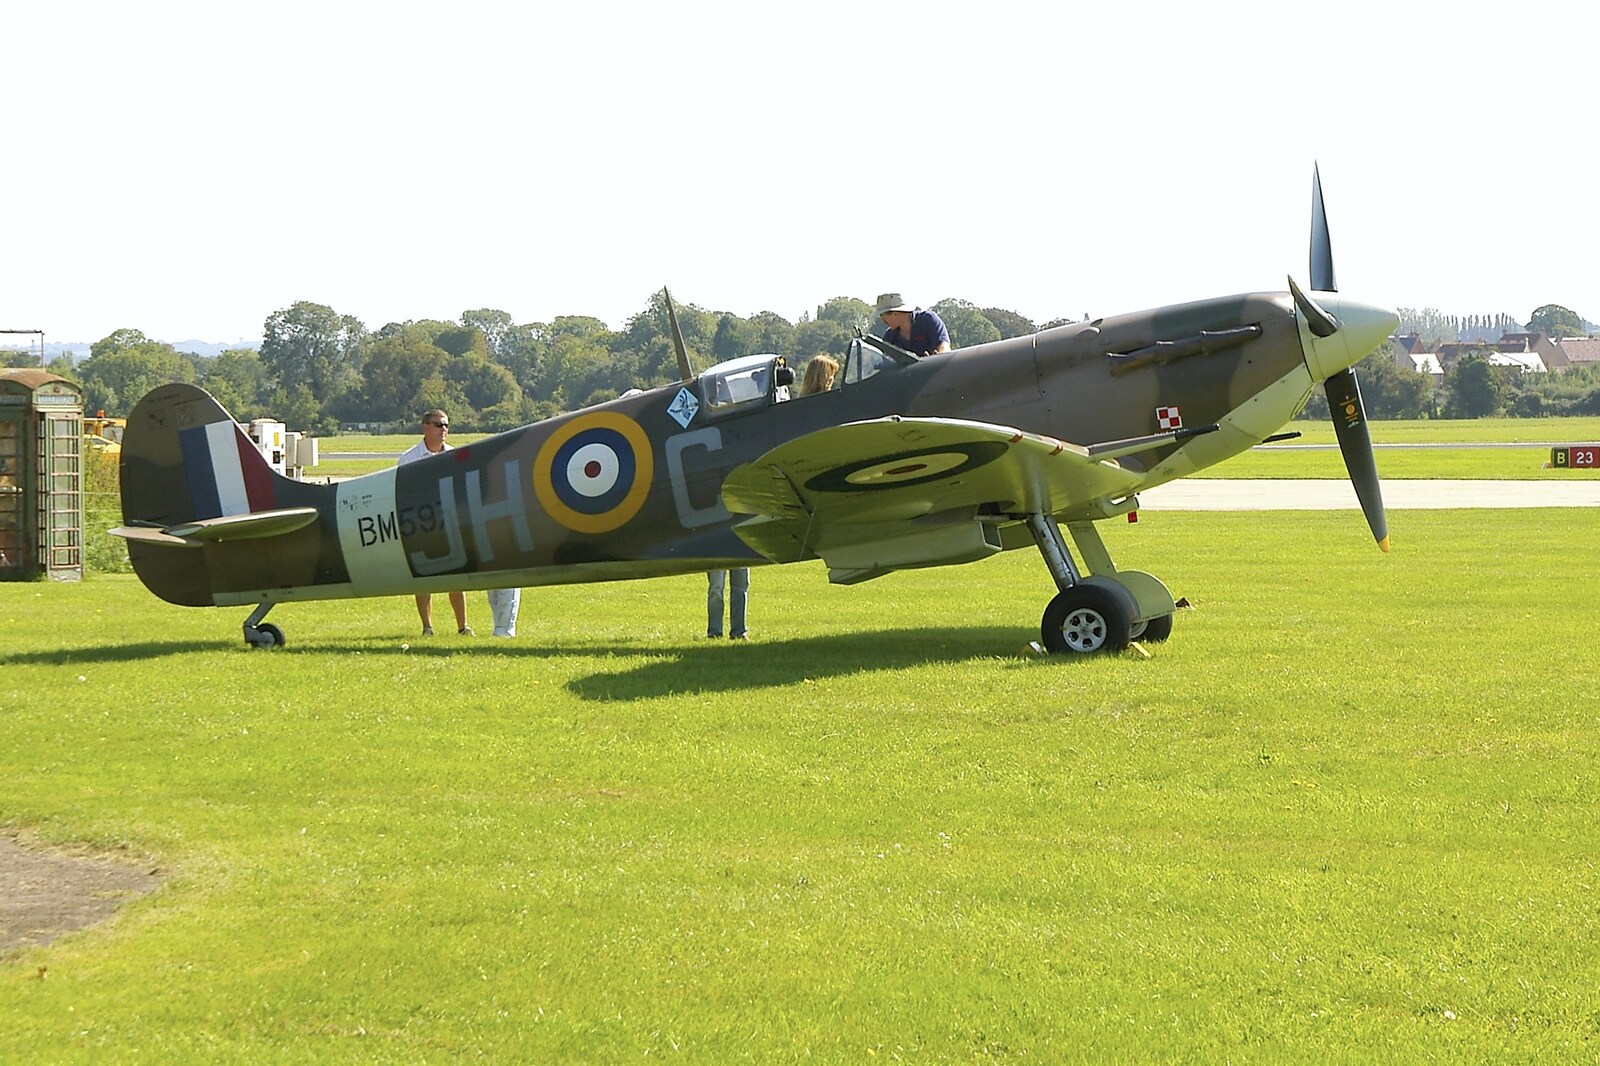 Spitfire BM598 at Cambridge Airport from Grantchester Meadows, Alex Hill at Revs and Spitfires - 10th September 2006